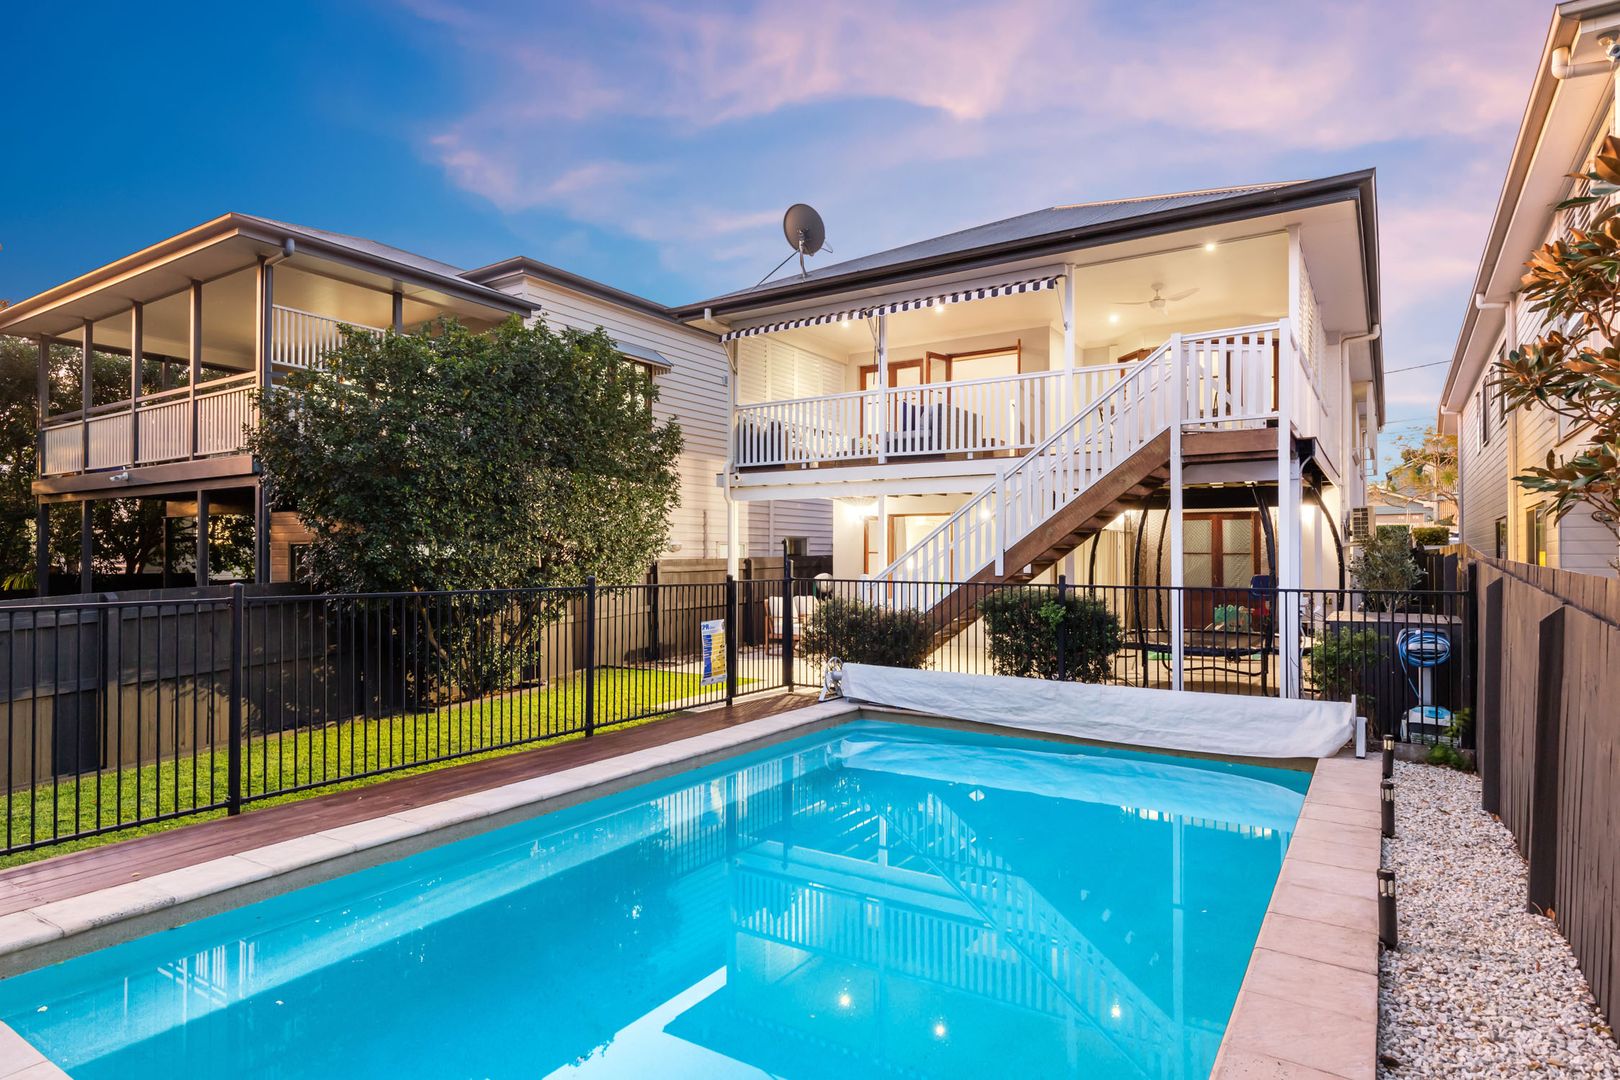 A dual-level Brisbane home sold at its on-market value as sellers appear to be adjusting their expectations to meet buyers, amid an uncertain market.